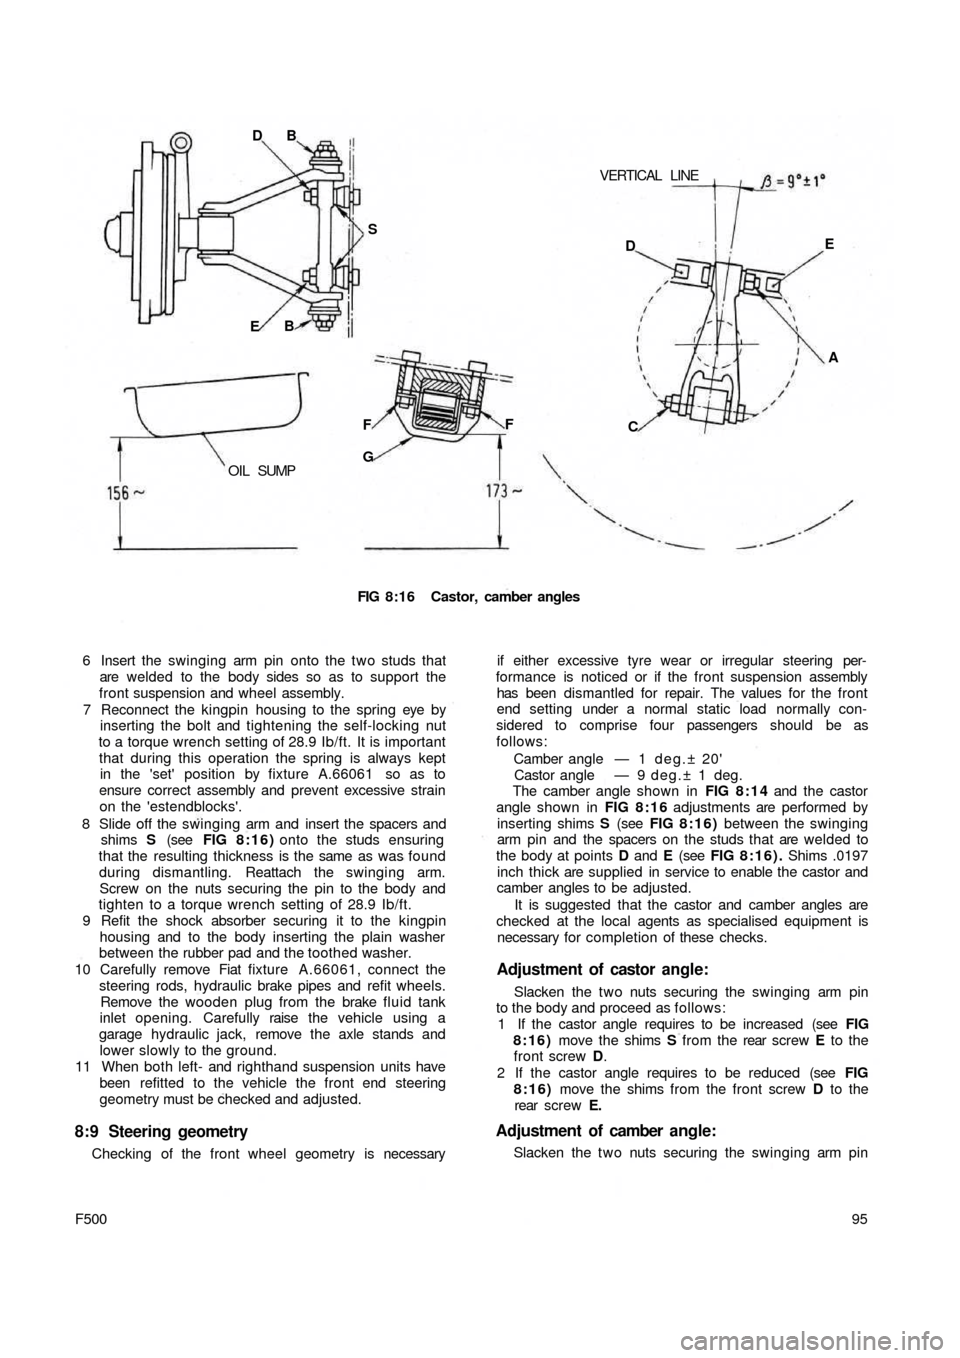 FIAT 500 1970 1.G Workshop Manual VERTICAL  LINE DB
S
EB
OIL  SUMPF
GF
FIG 8:16 Castor, camber angles
6 Insert the swinging arm pin onto the two studs that
are welded  to the  body sides so as to support the
front suspension and wheel